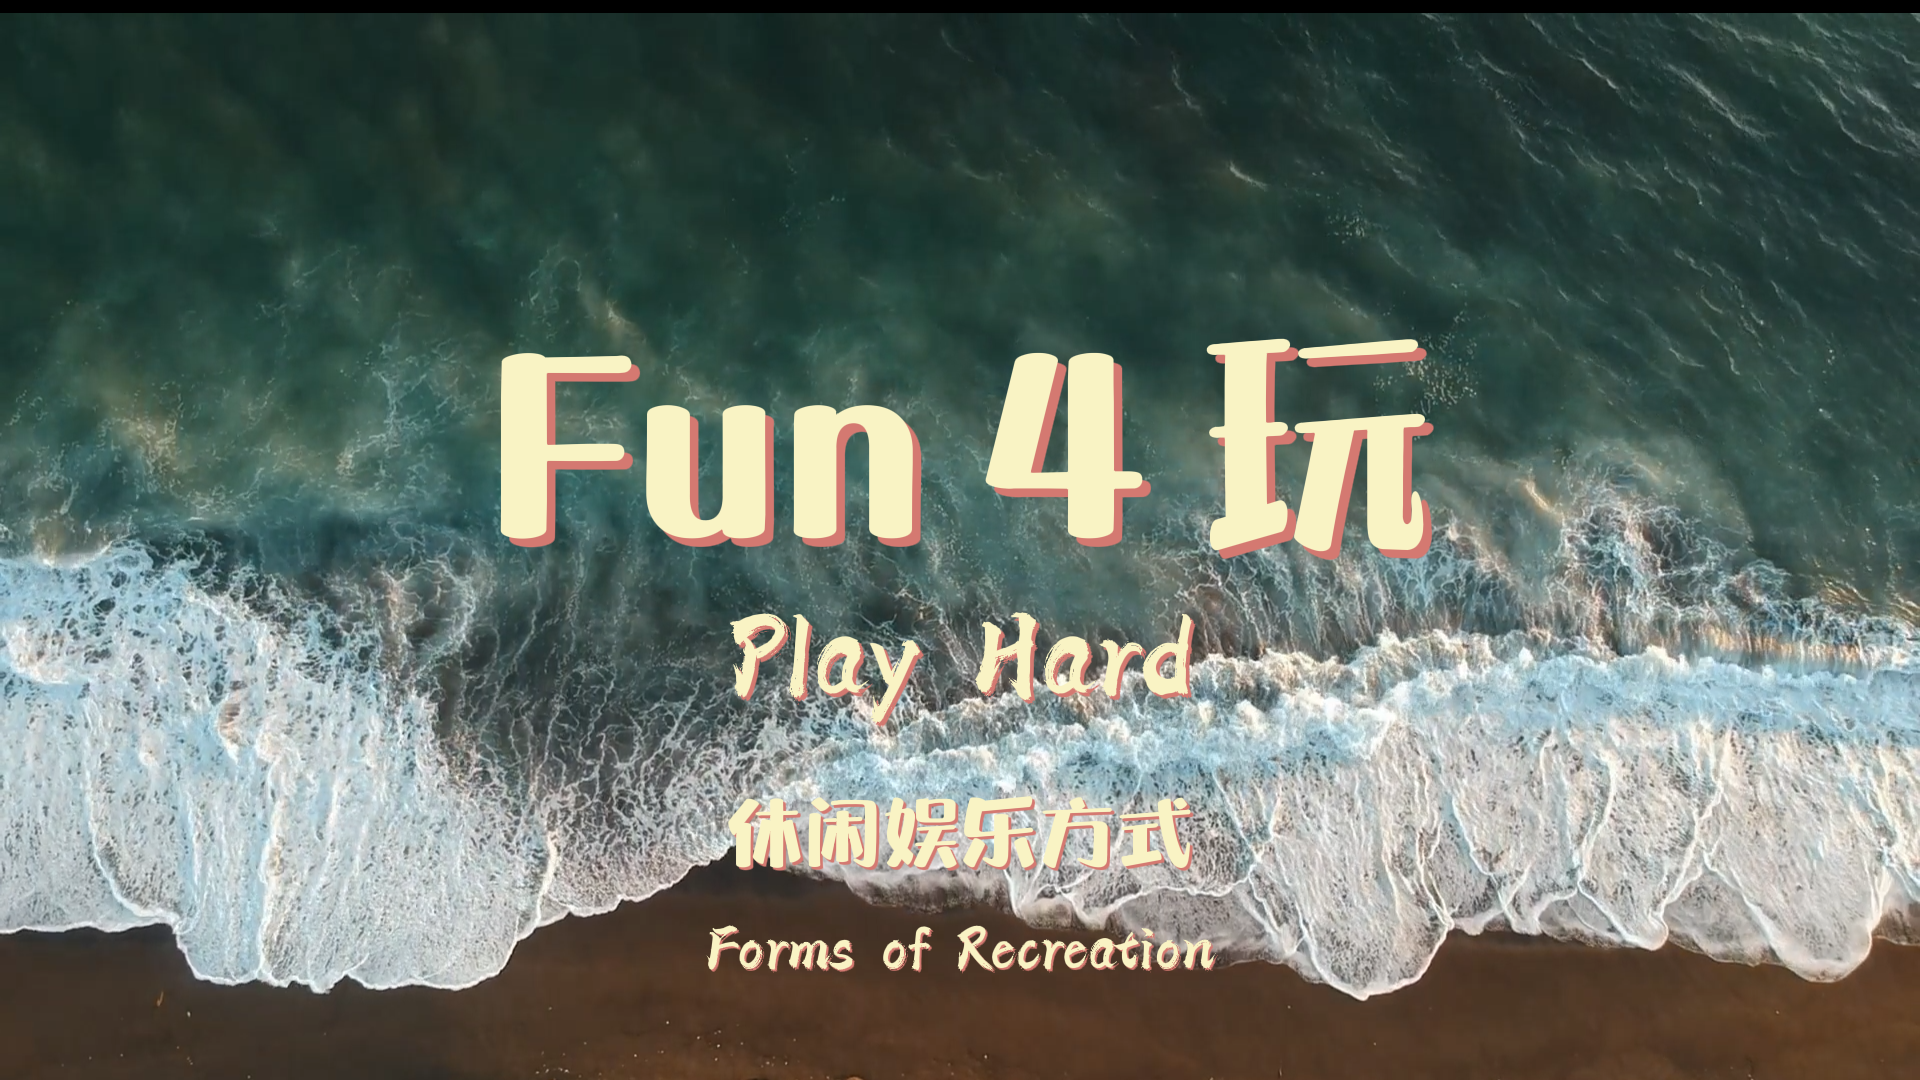 Lesson 3 Play Hard - Forms of Recreation